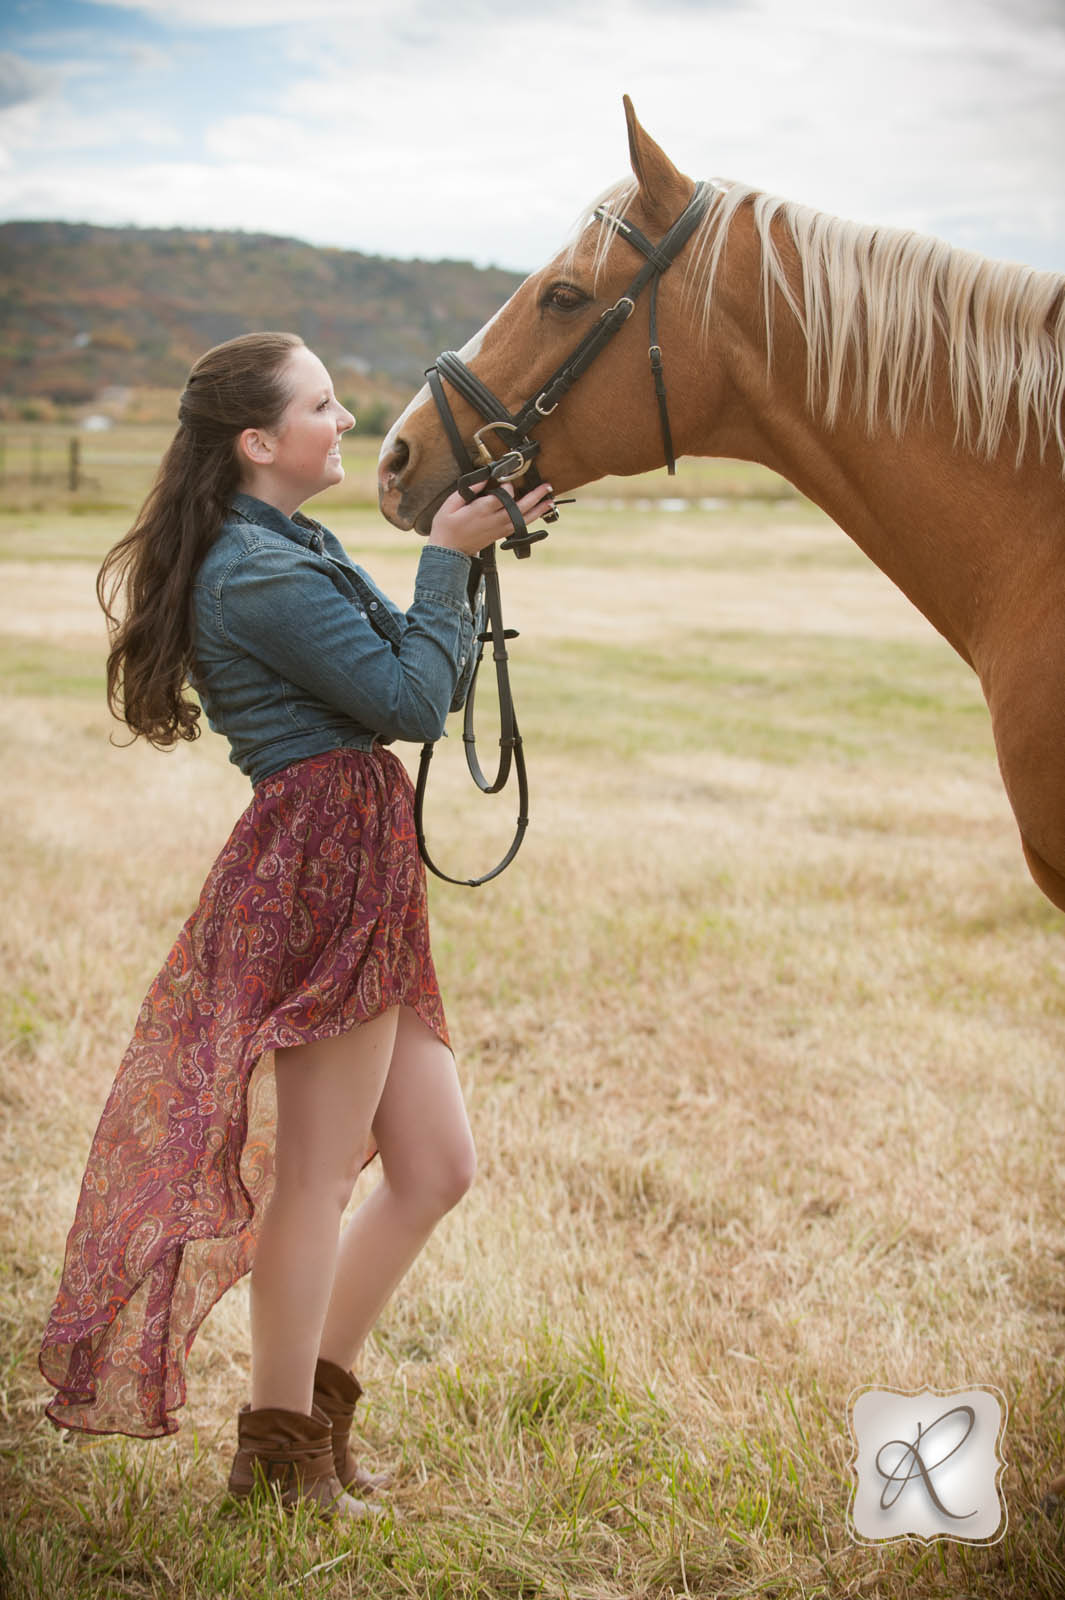 Emma's Senior Pictures With Her Horse